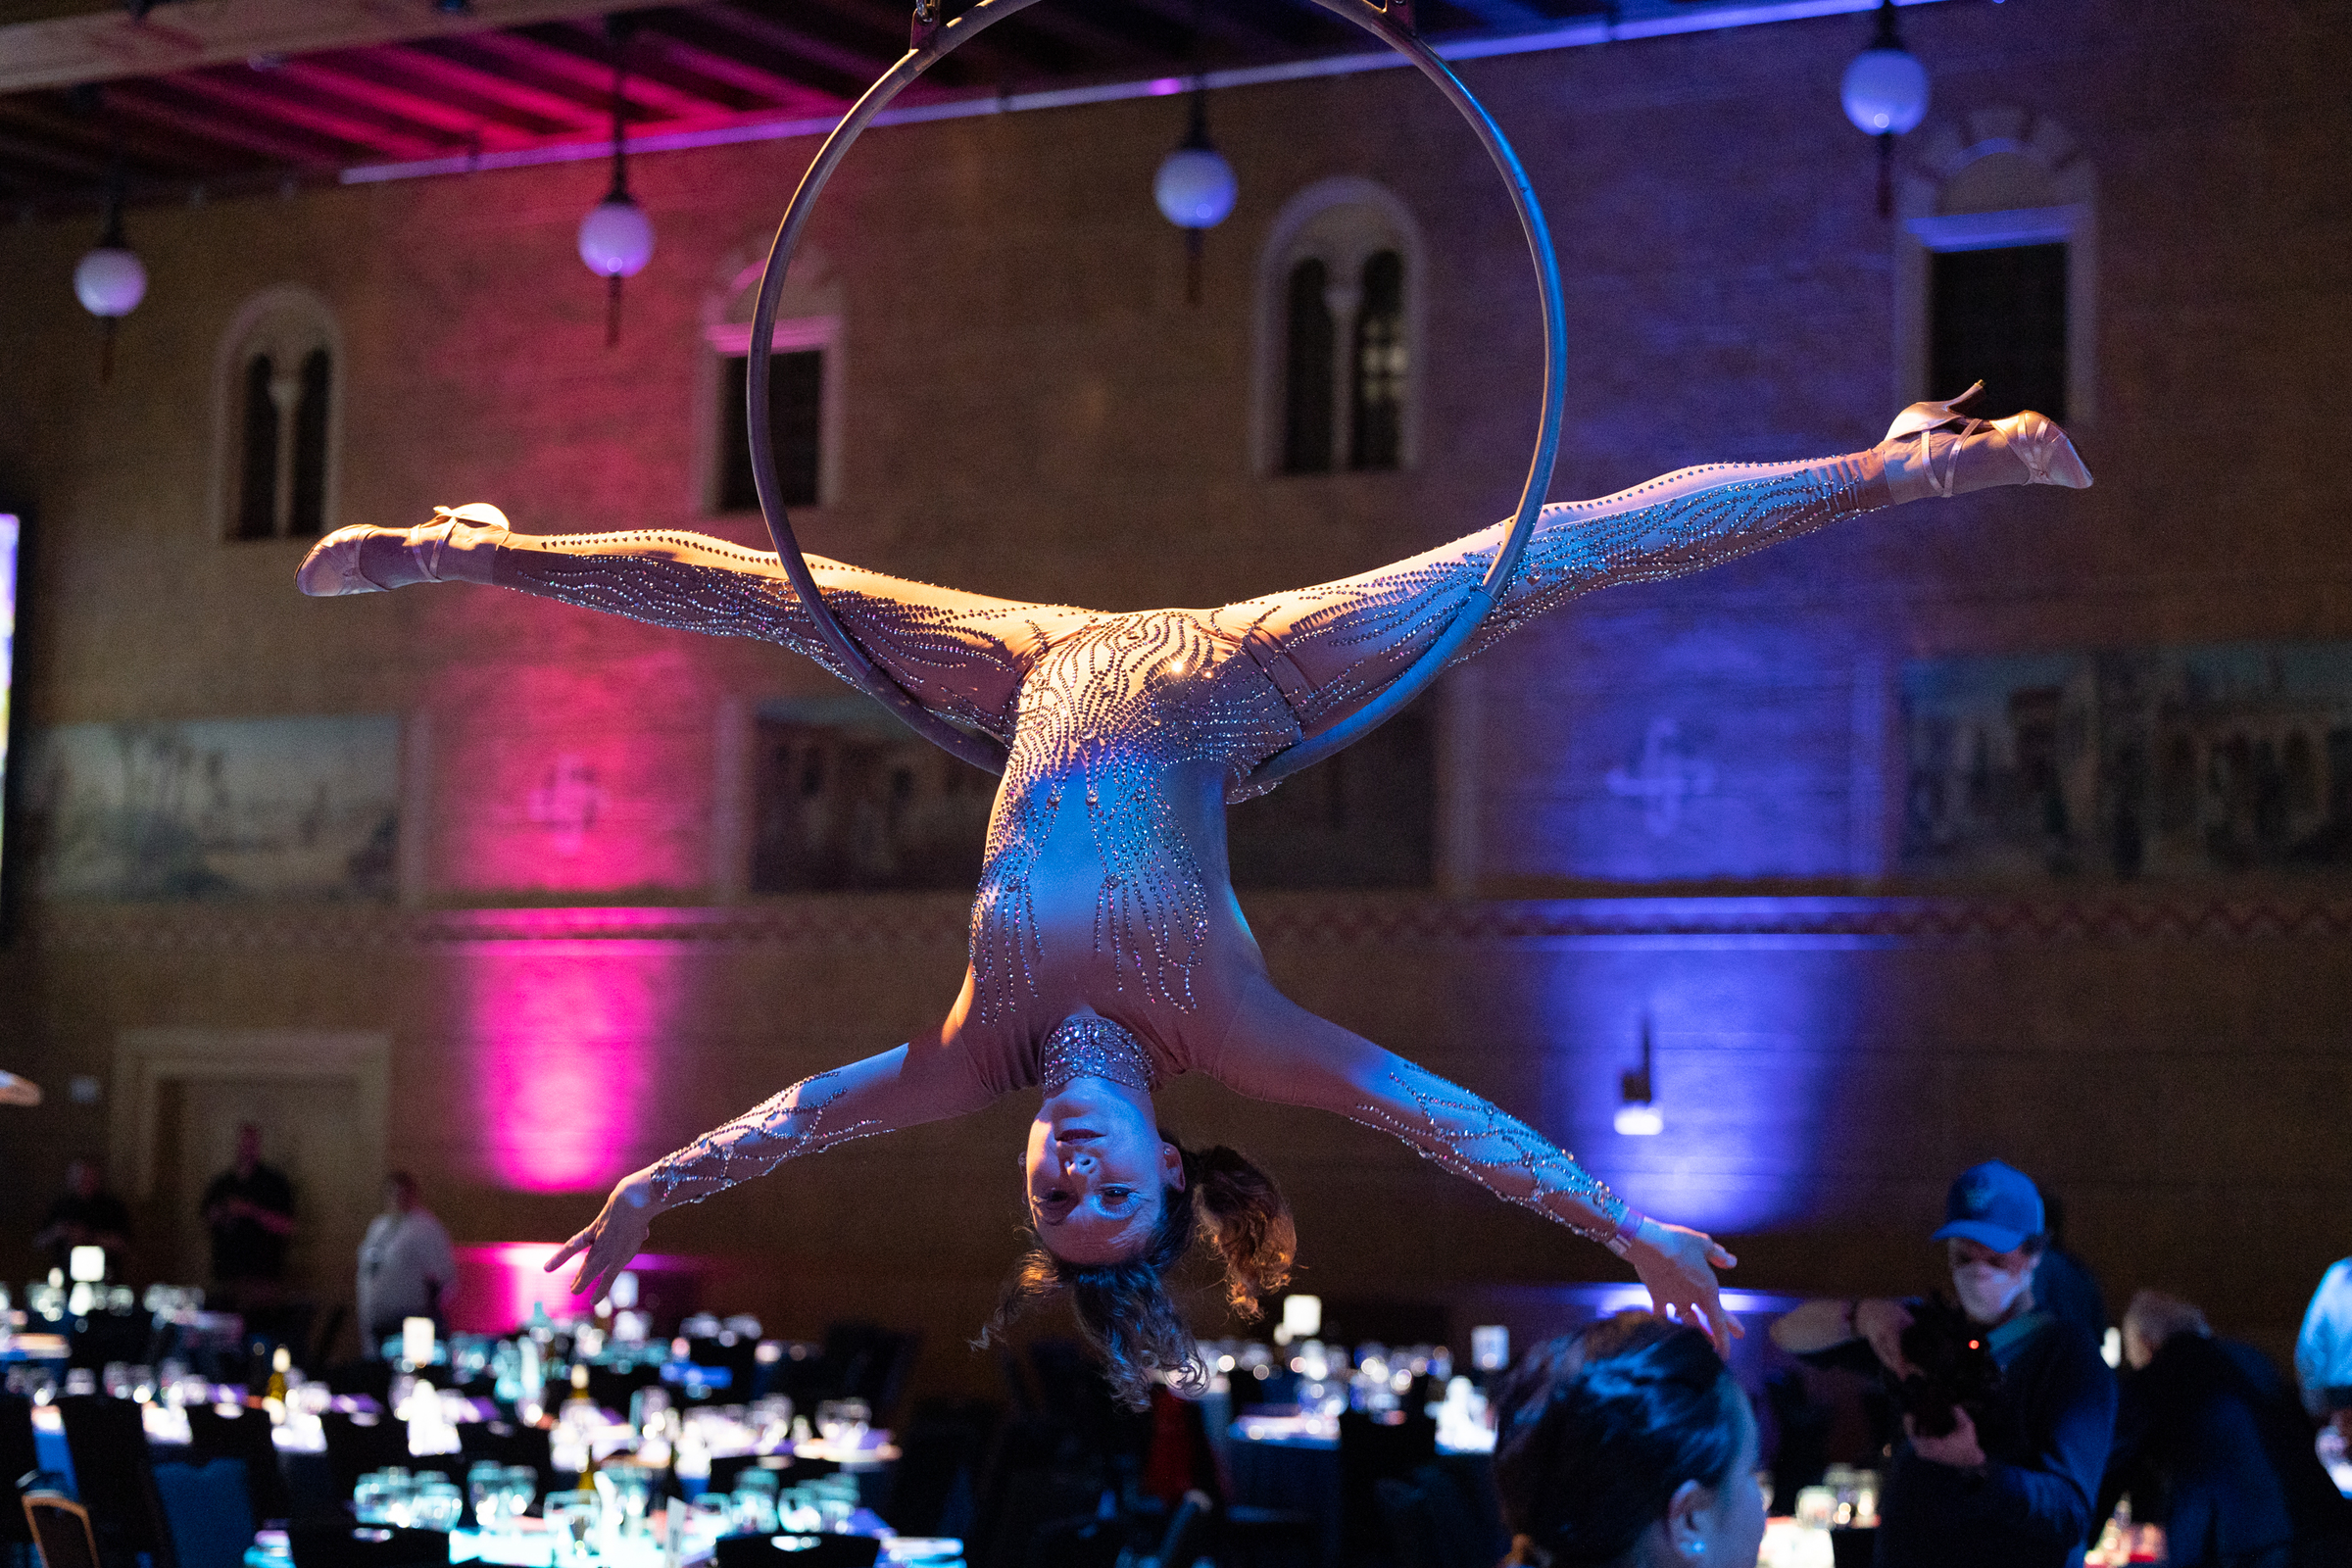 Aerial acrobat hanging upside down in a ring inside of a ballroom.